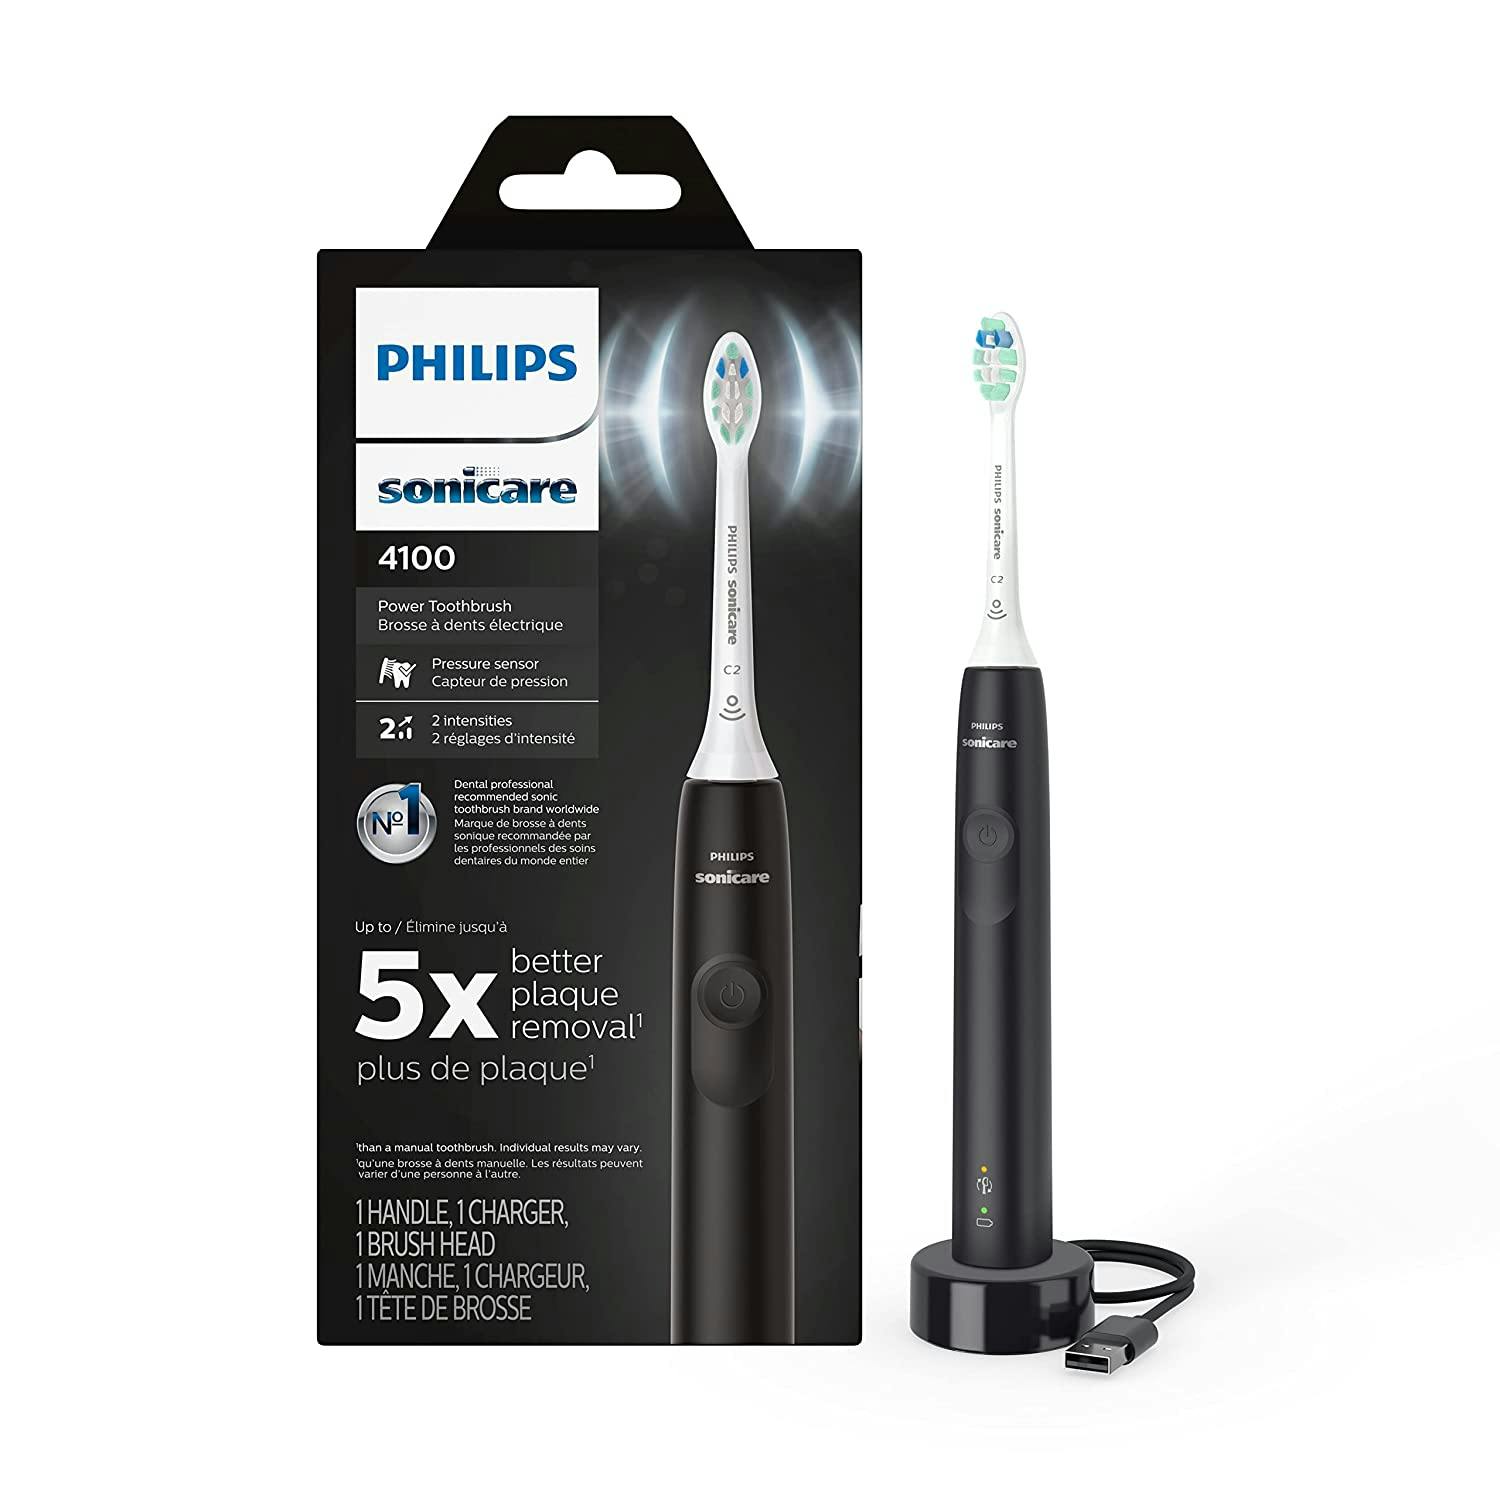 Philips soniccare toothbrush